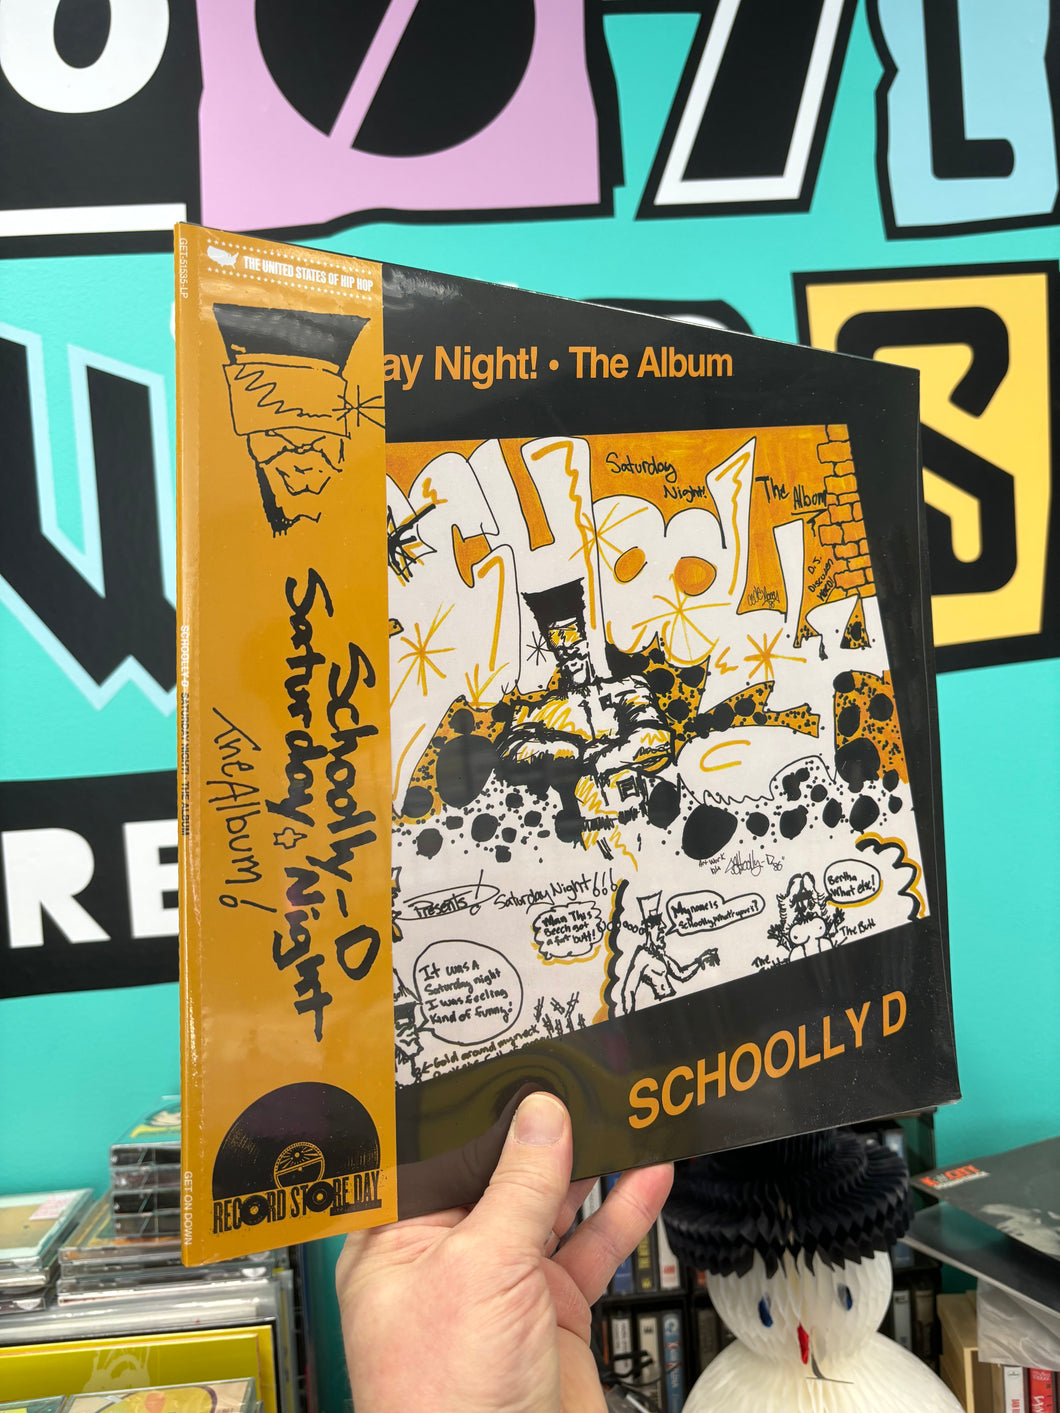 RSD 2024‼️‼️‼️ Schoolly D: Saturday Night! - The Album, reissue, LP, Limited Edition, Record Store Day, Lemon Pepper colored vinyl, USA & Europe 2024